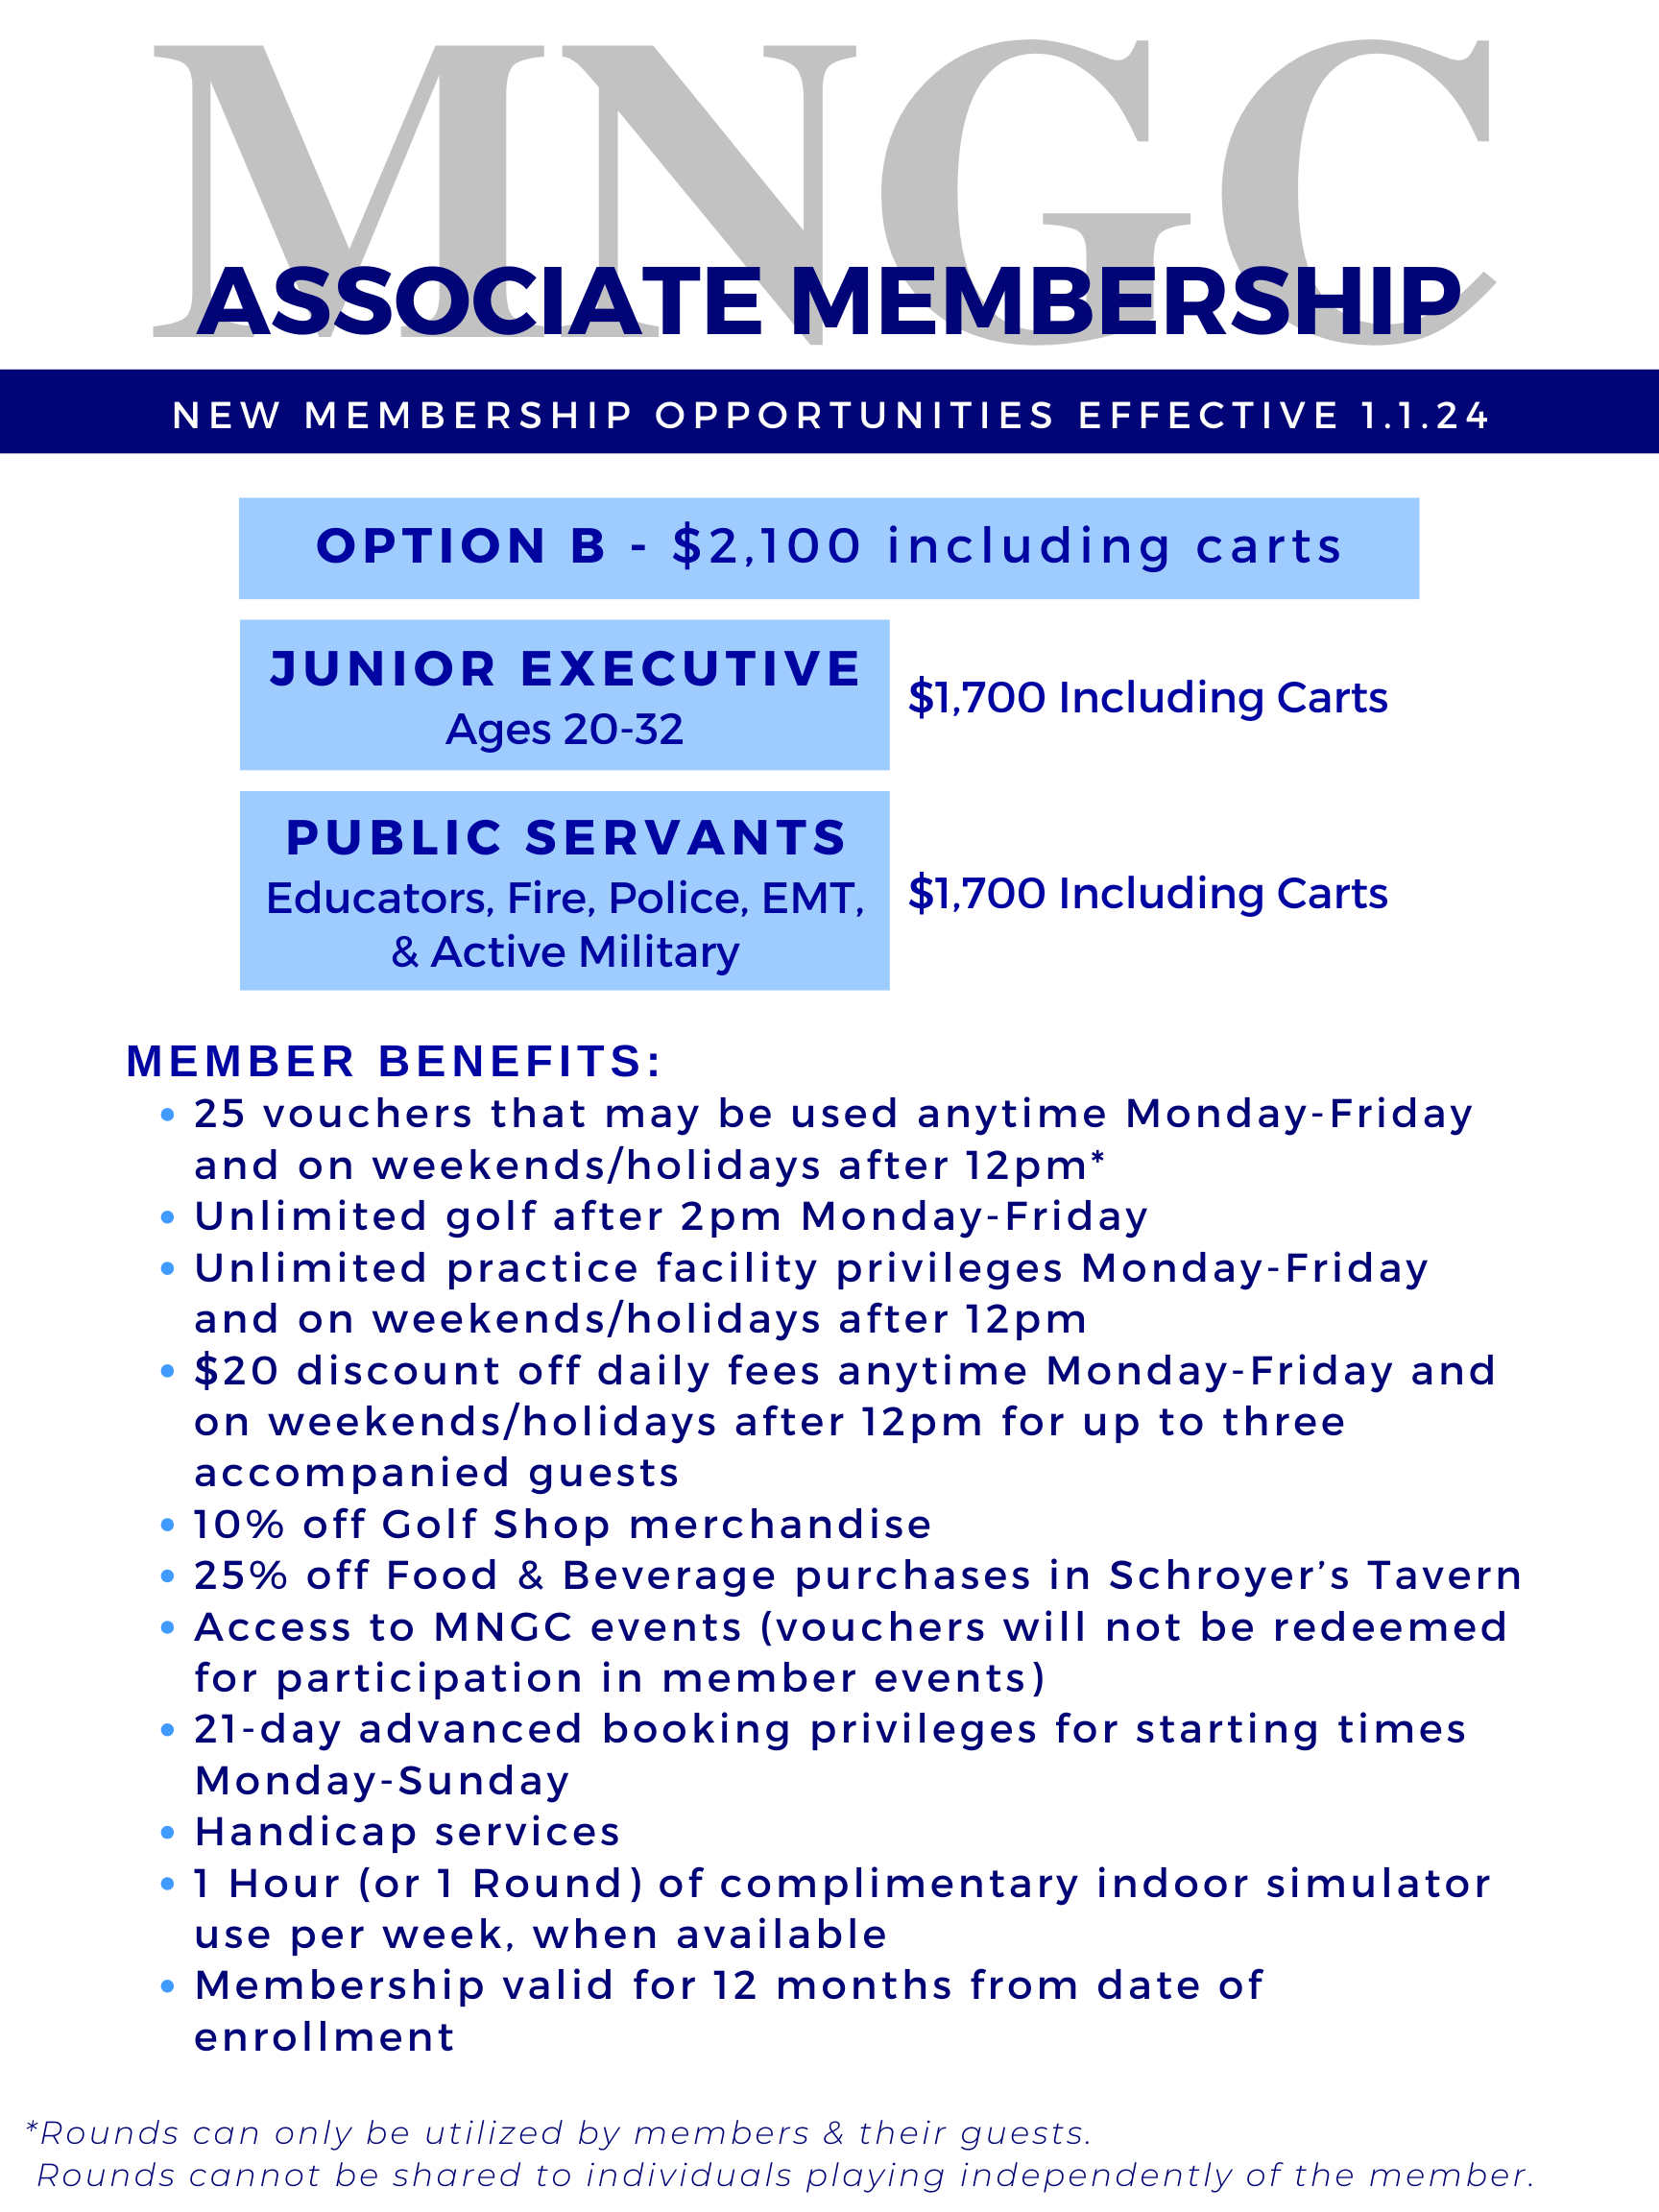 Learn more about our Associate B Membership, effective 1.1.24!